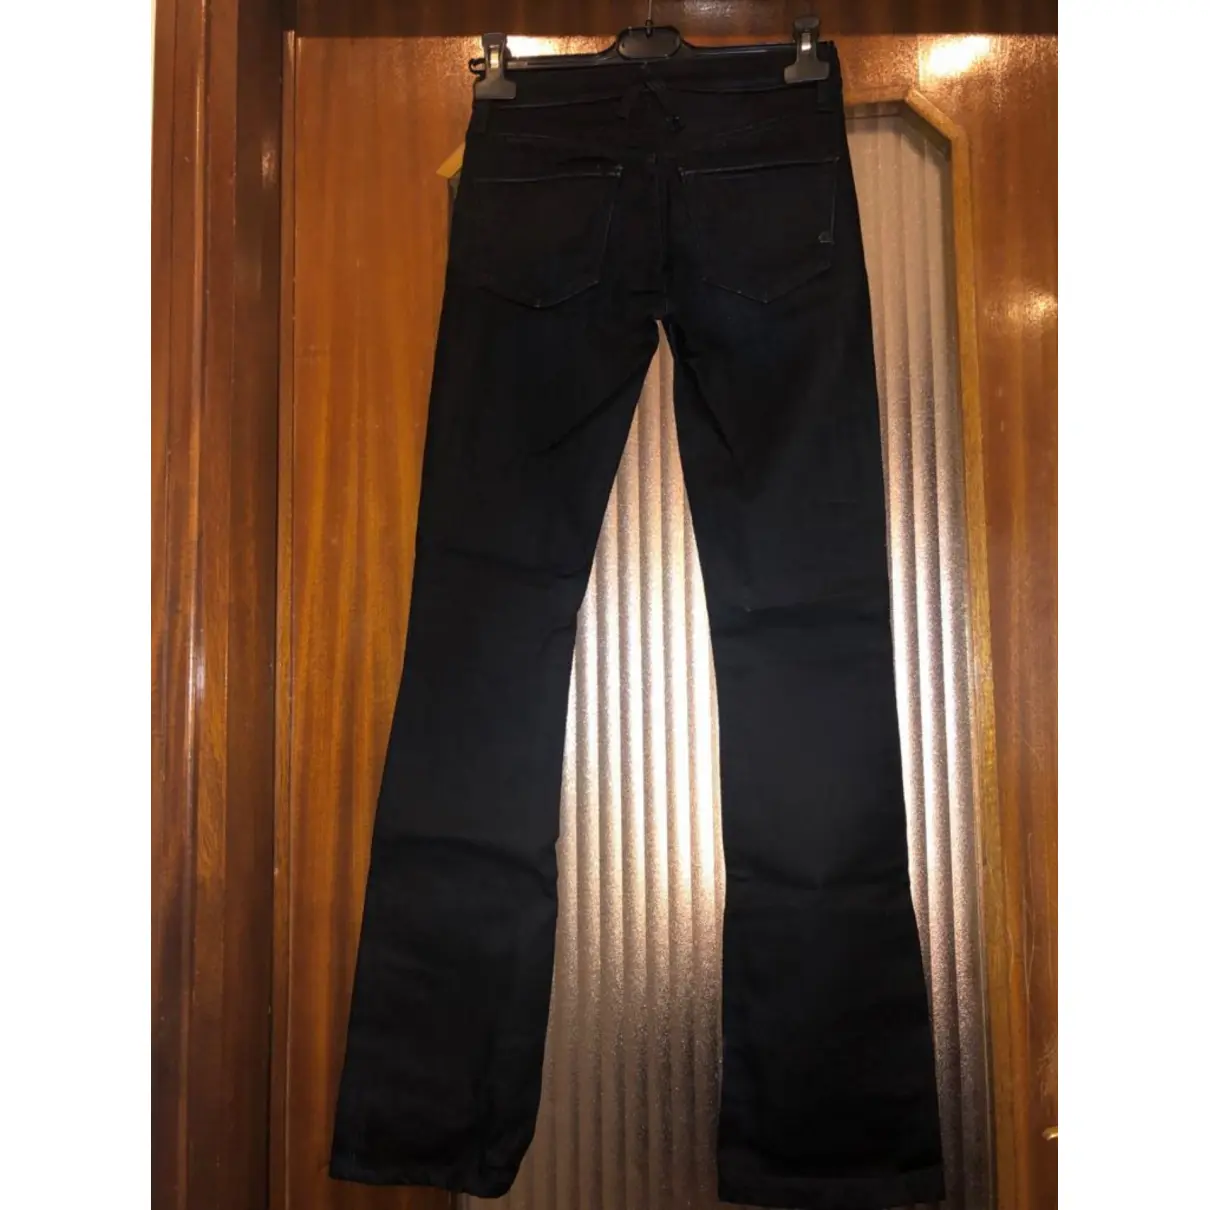 Buy Cycle Straight pants online